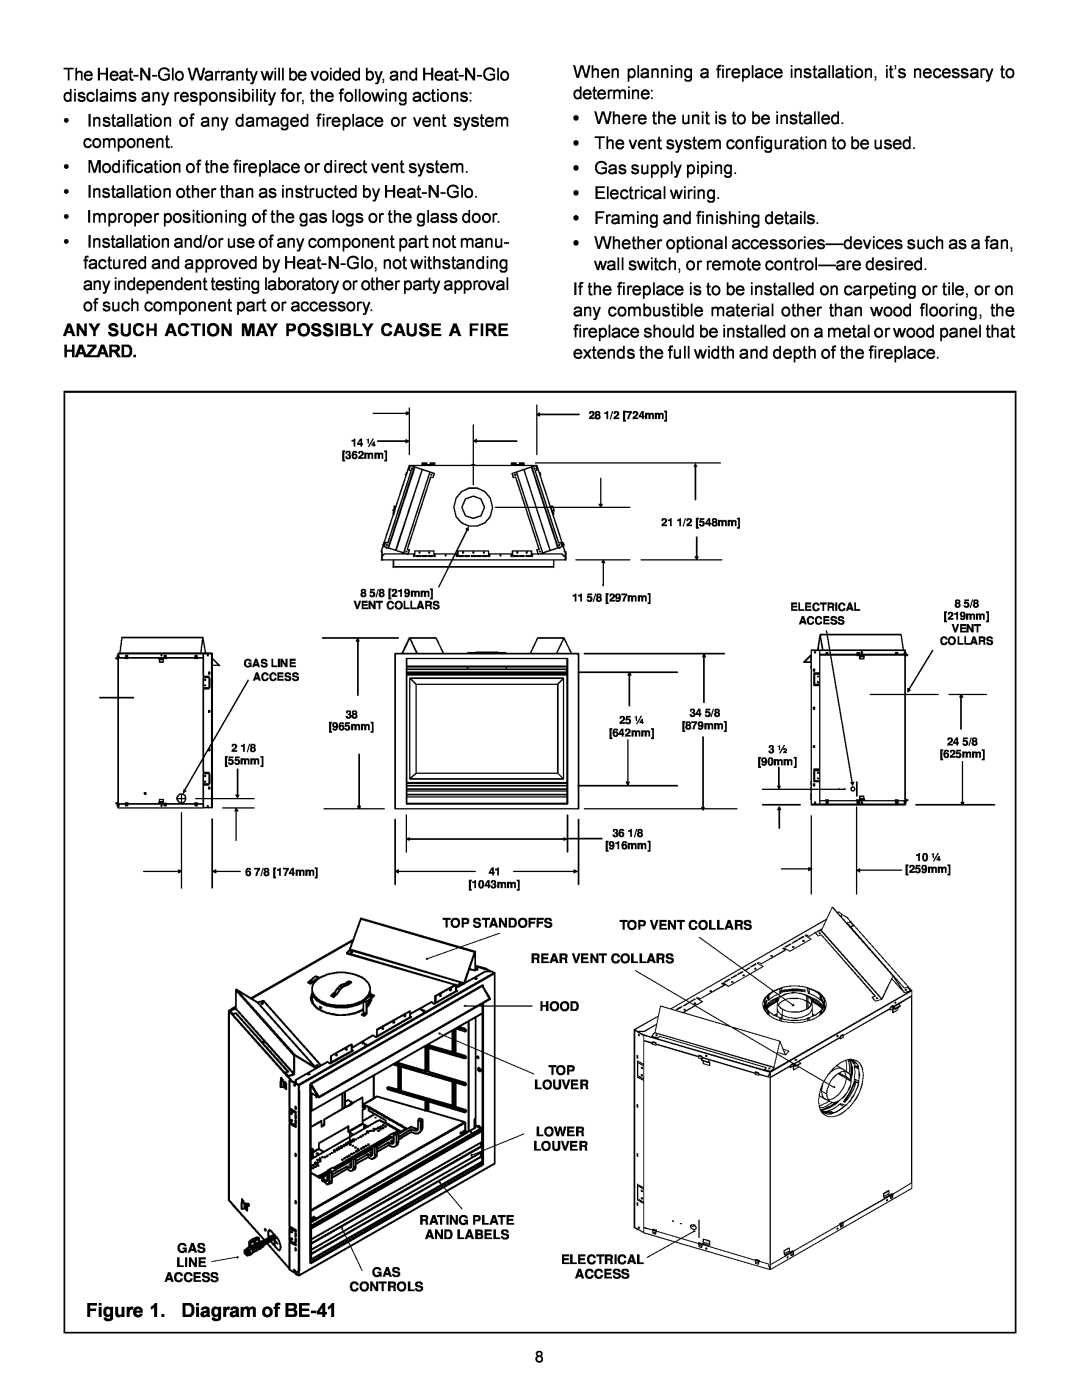 Heat & Glo LifeStyle manual Diagram of BE-41, Any Such Action May Possibly Cause A Fire Hazard 